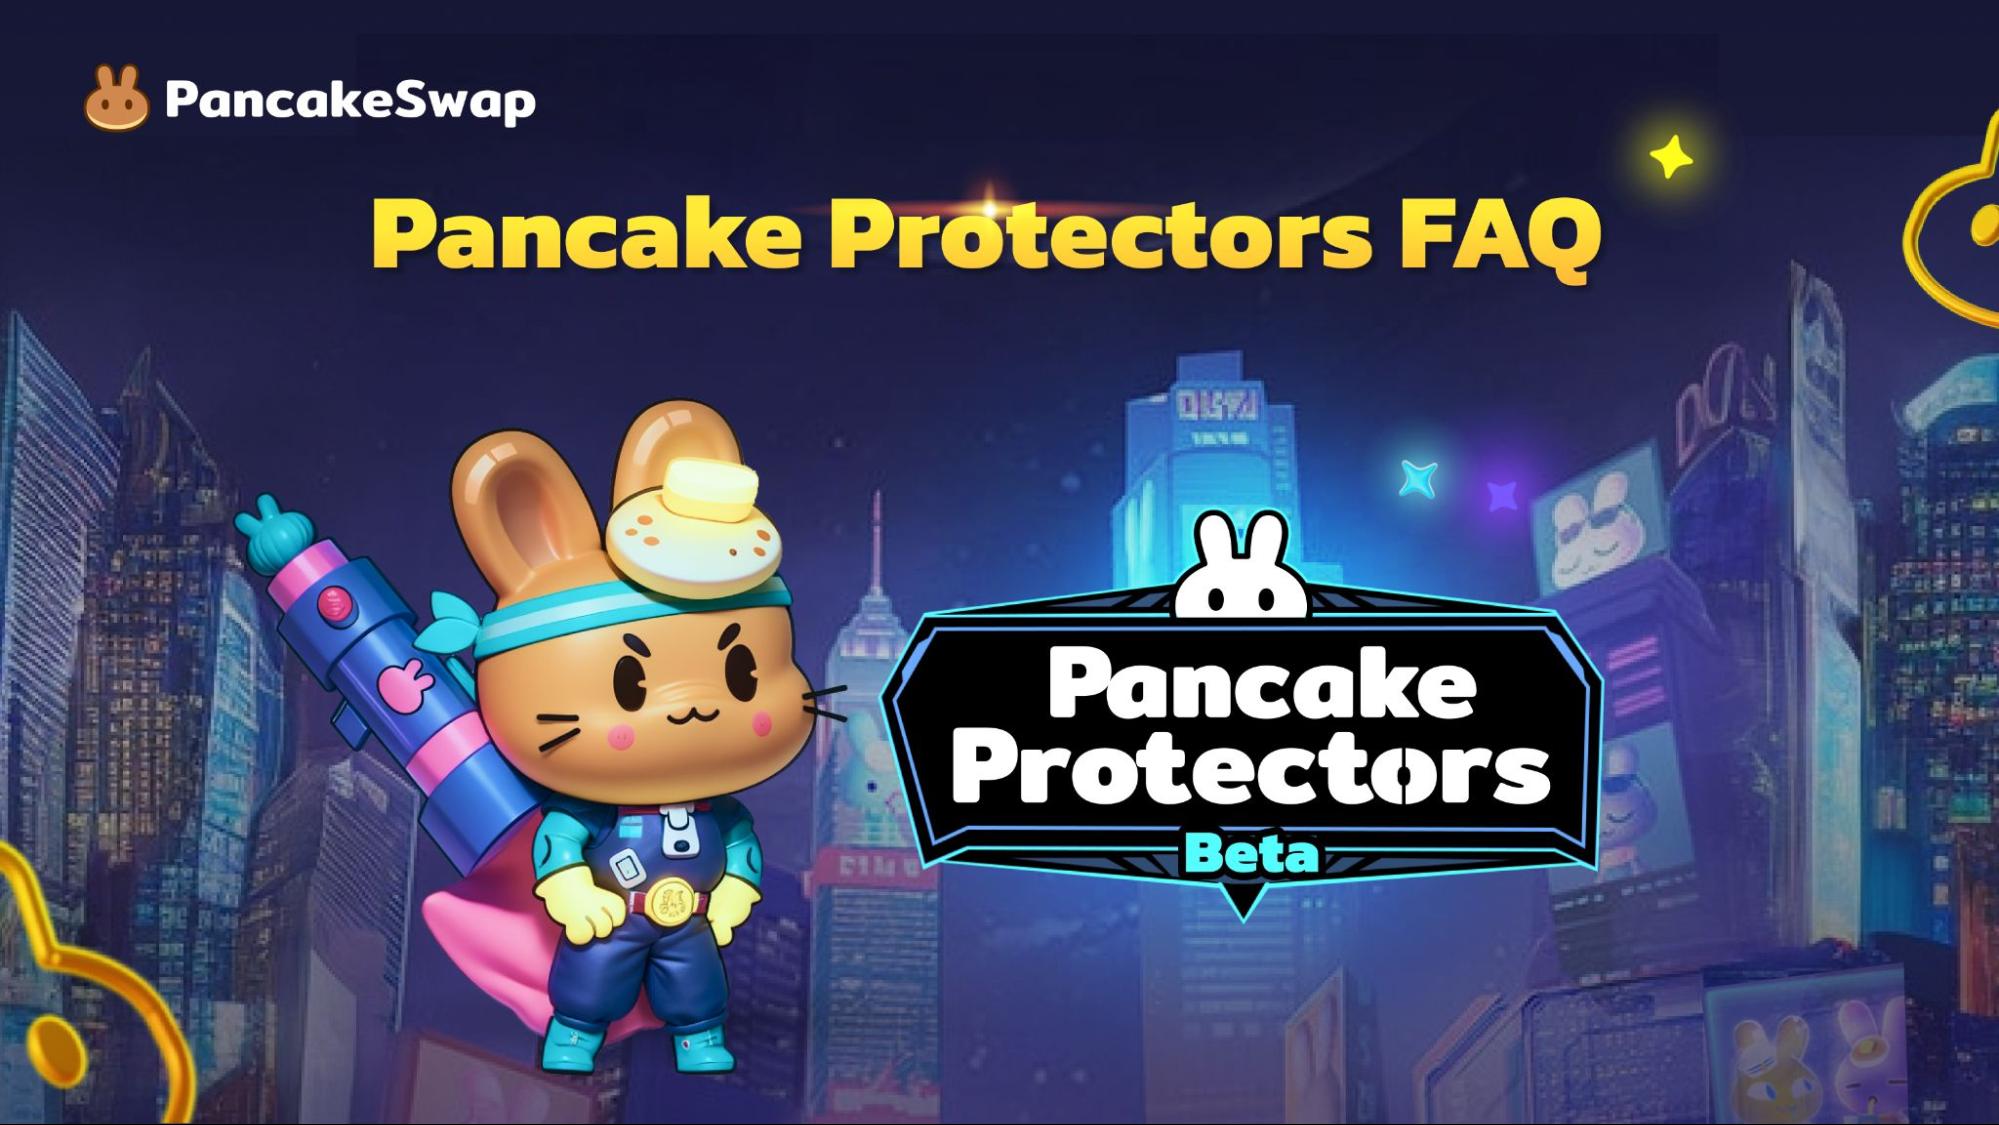 PancakeSwap Launches Its Own Play-to-Earn Game - Pancake Protectors 